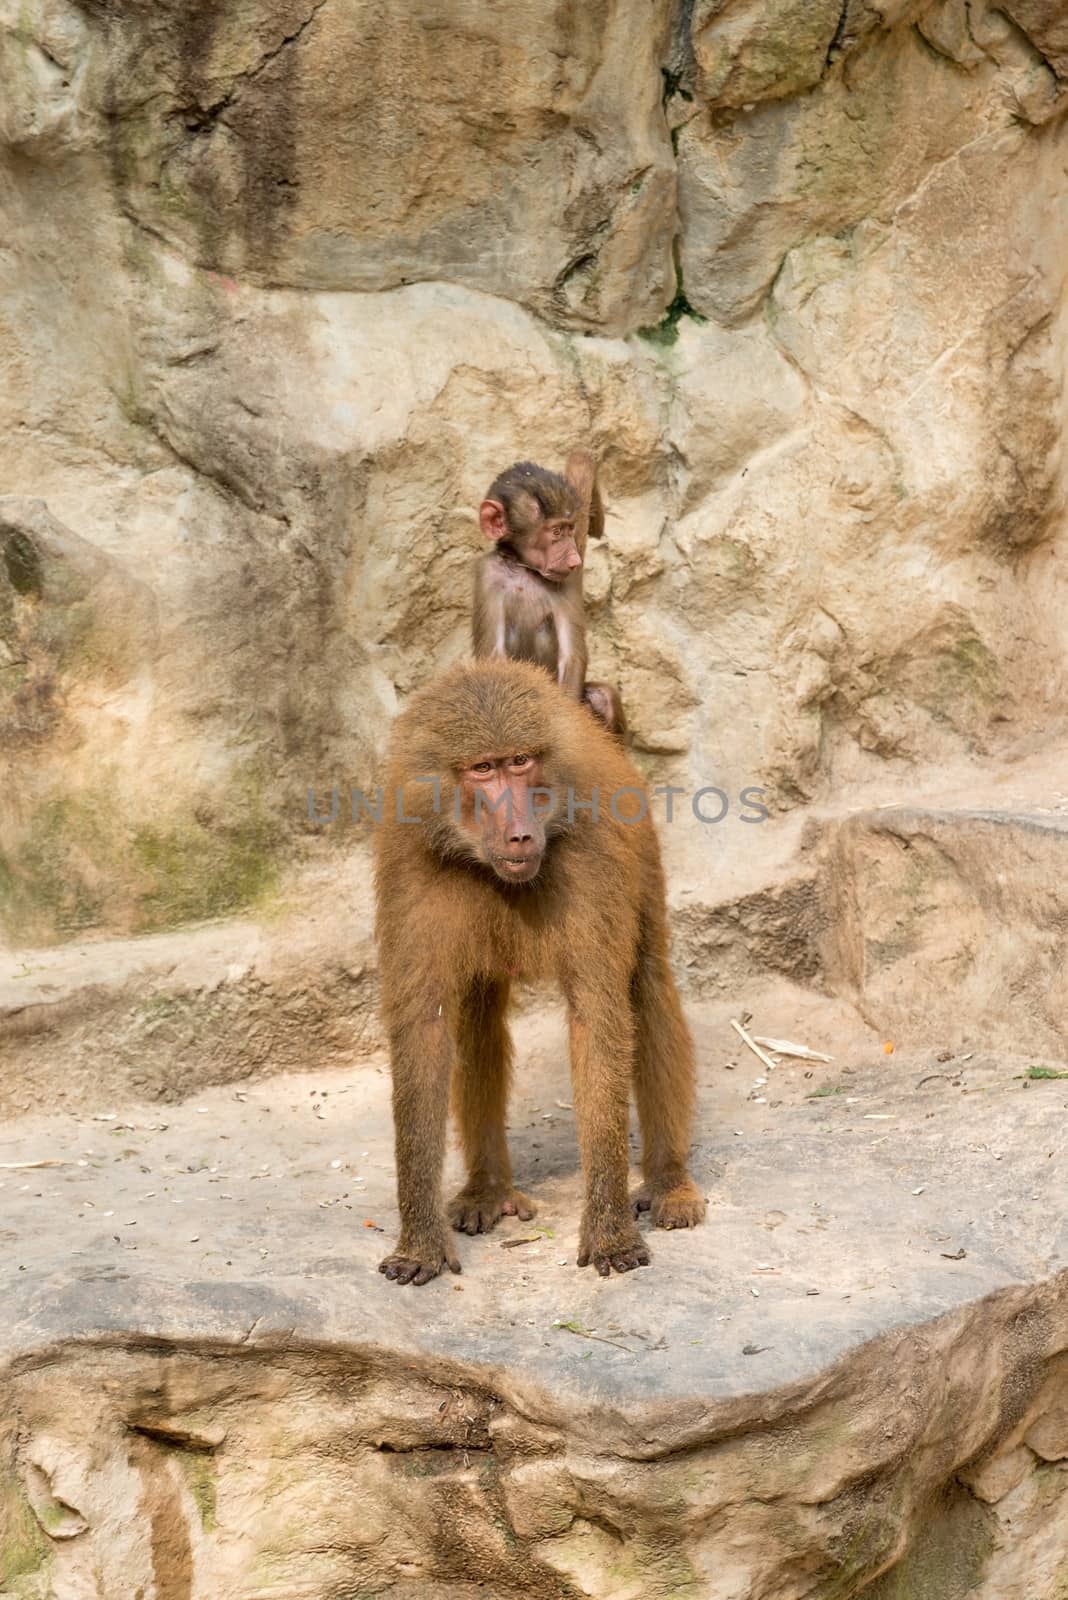 Baboon baby riding on it's mother's back  by iryna_rasko